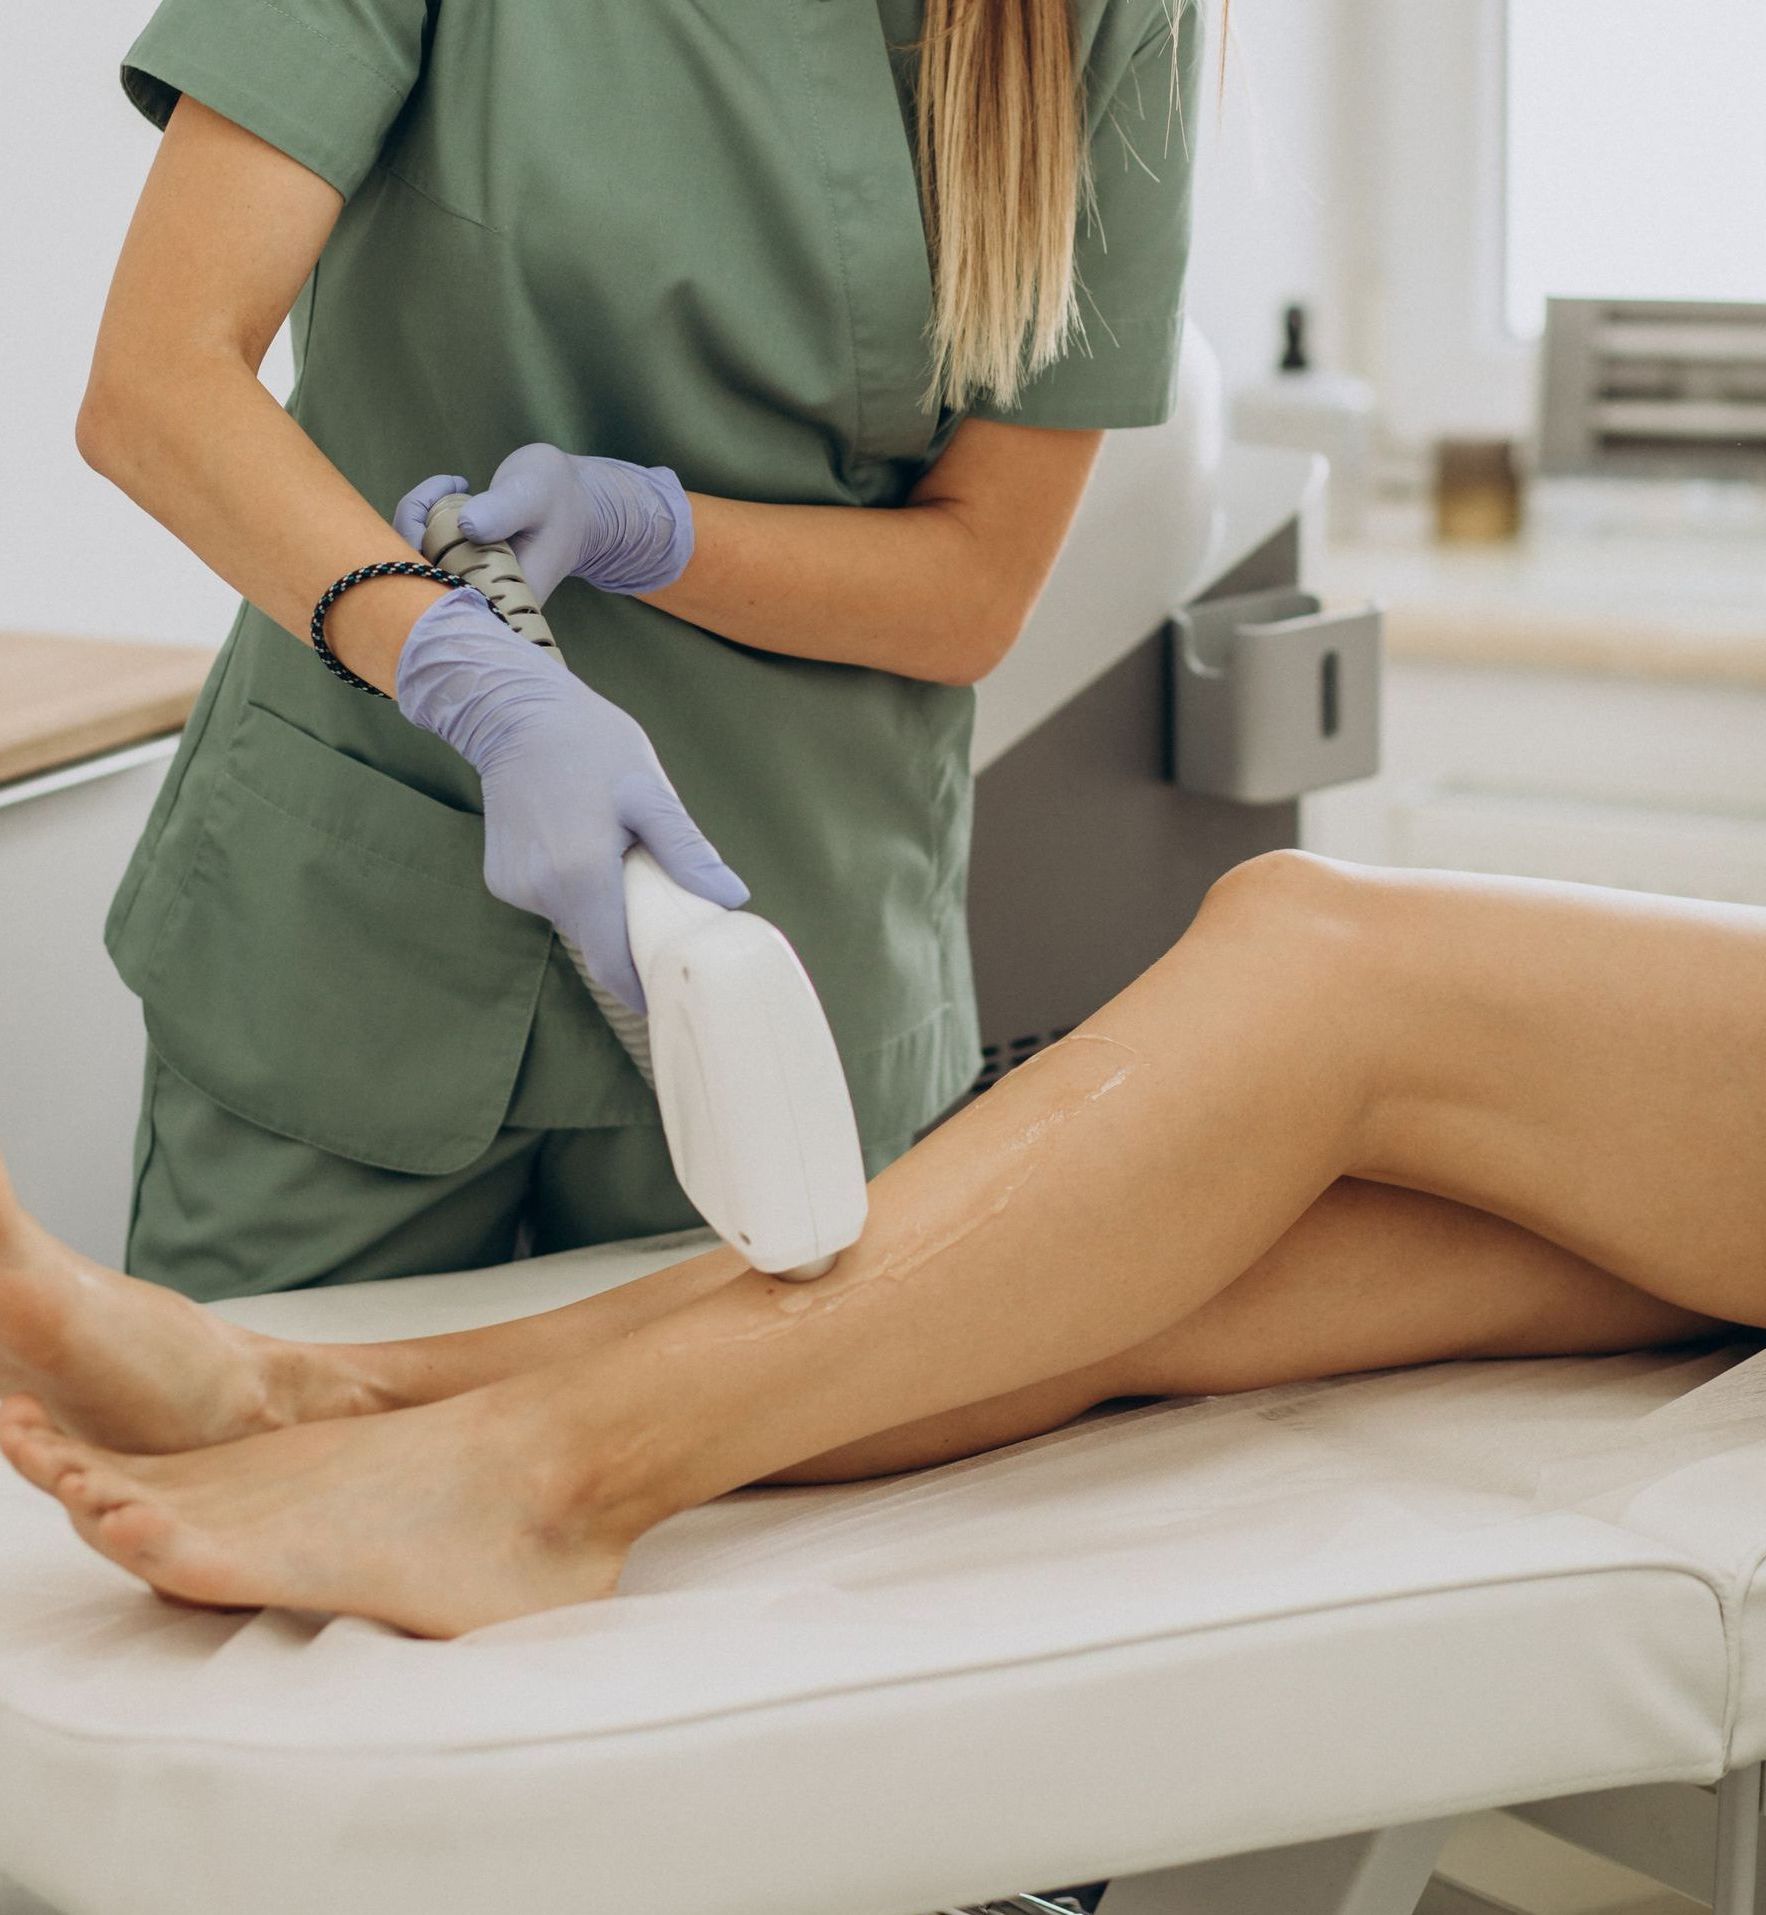 woman getting laser hair removal